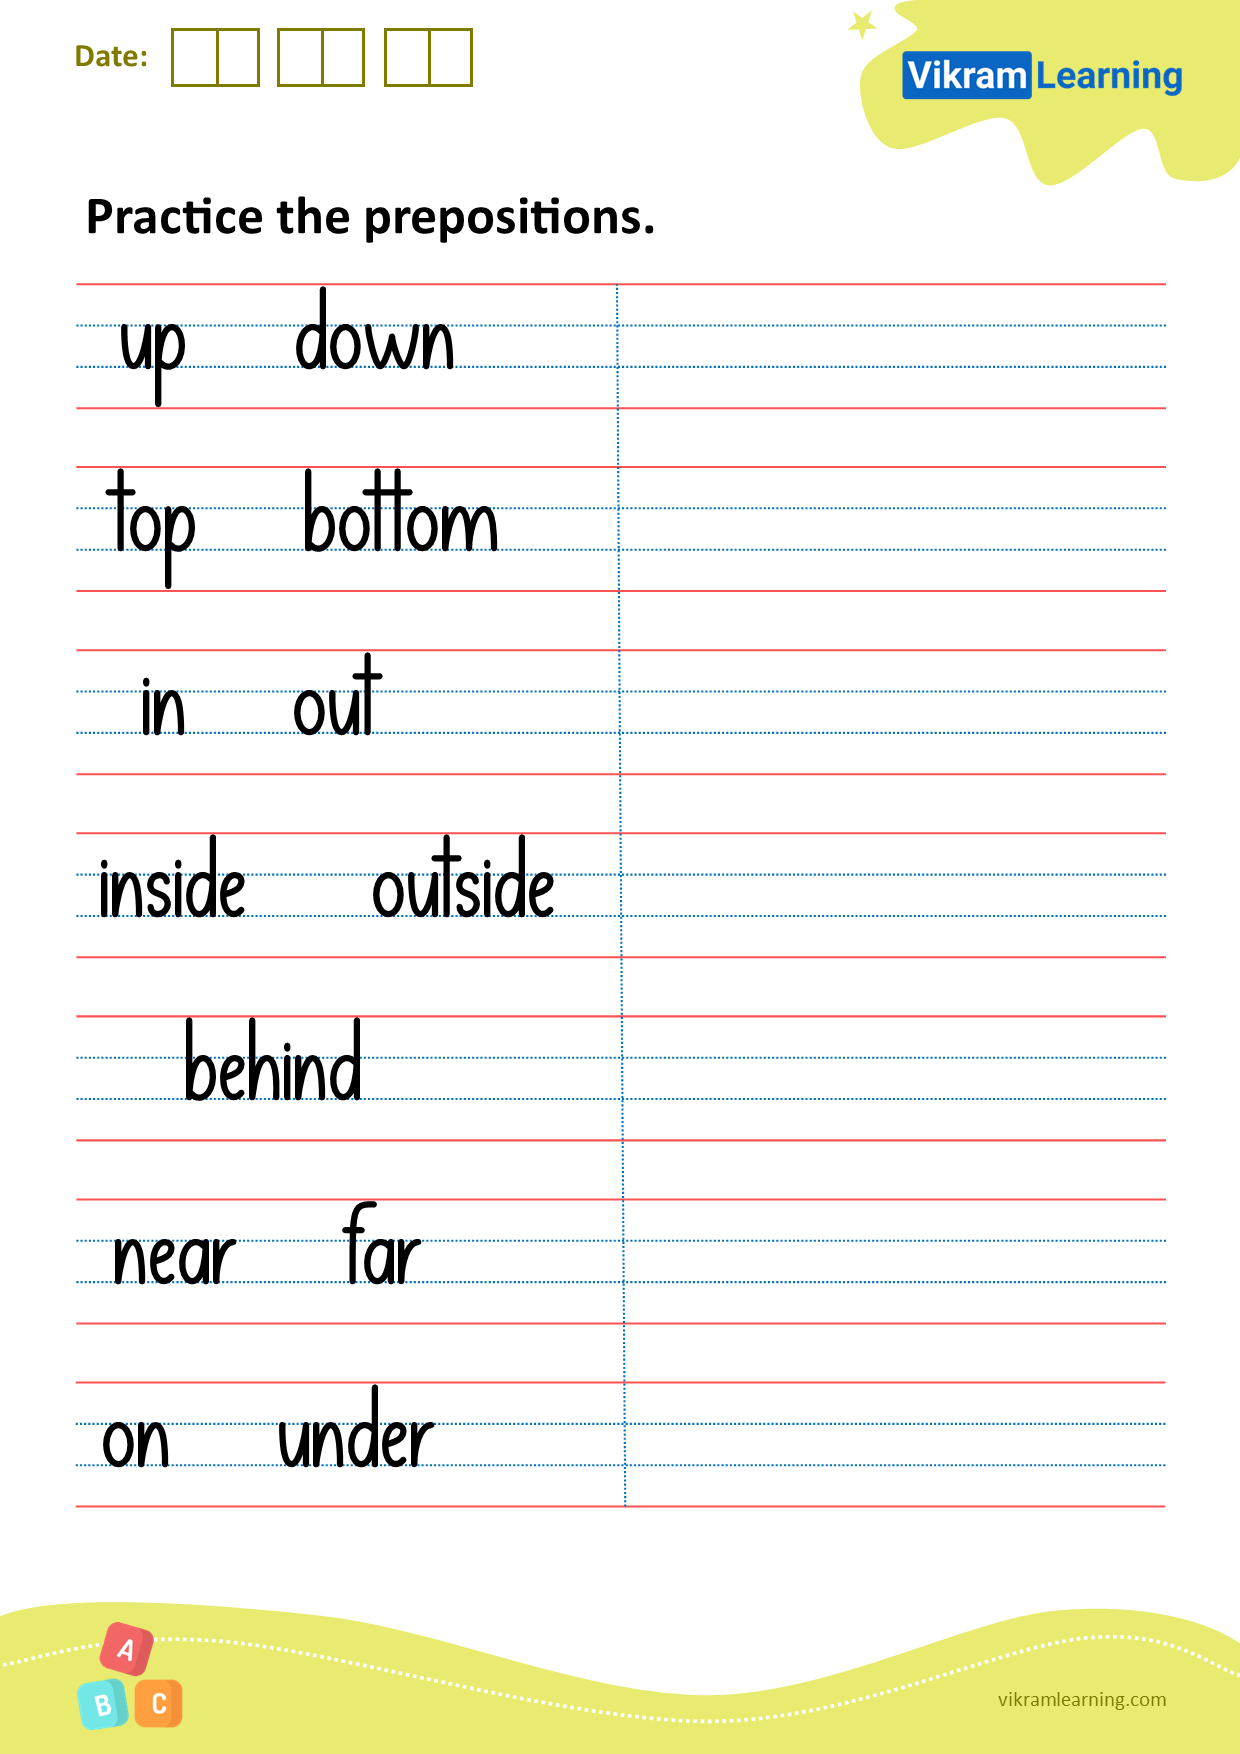 Download practice the prepositions worksheets